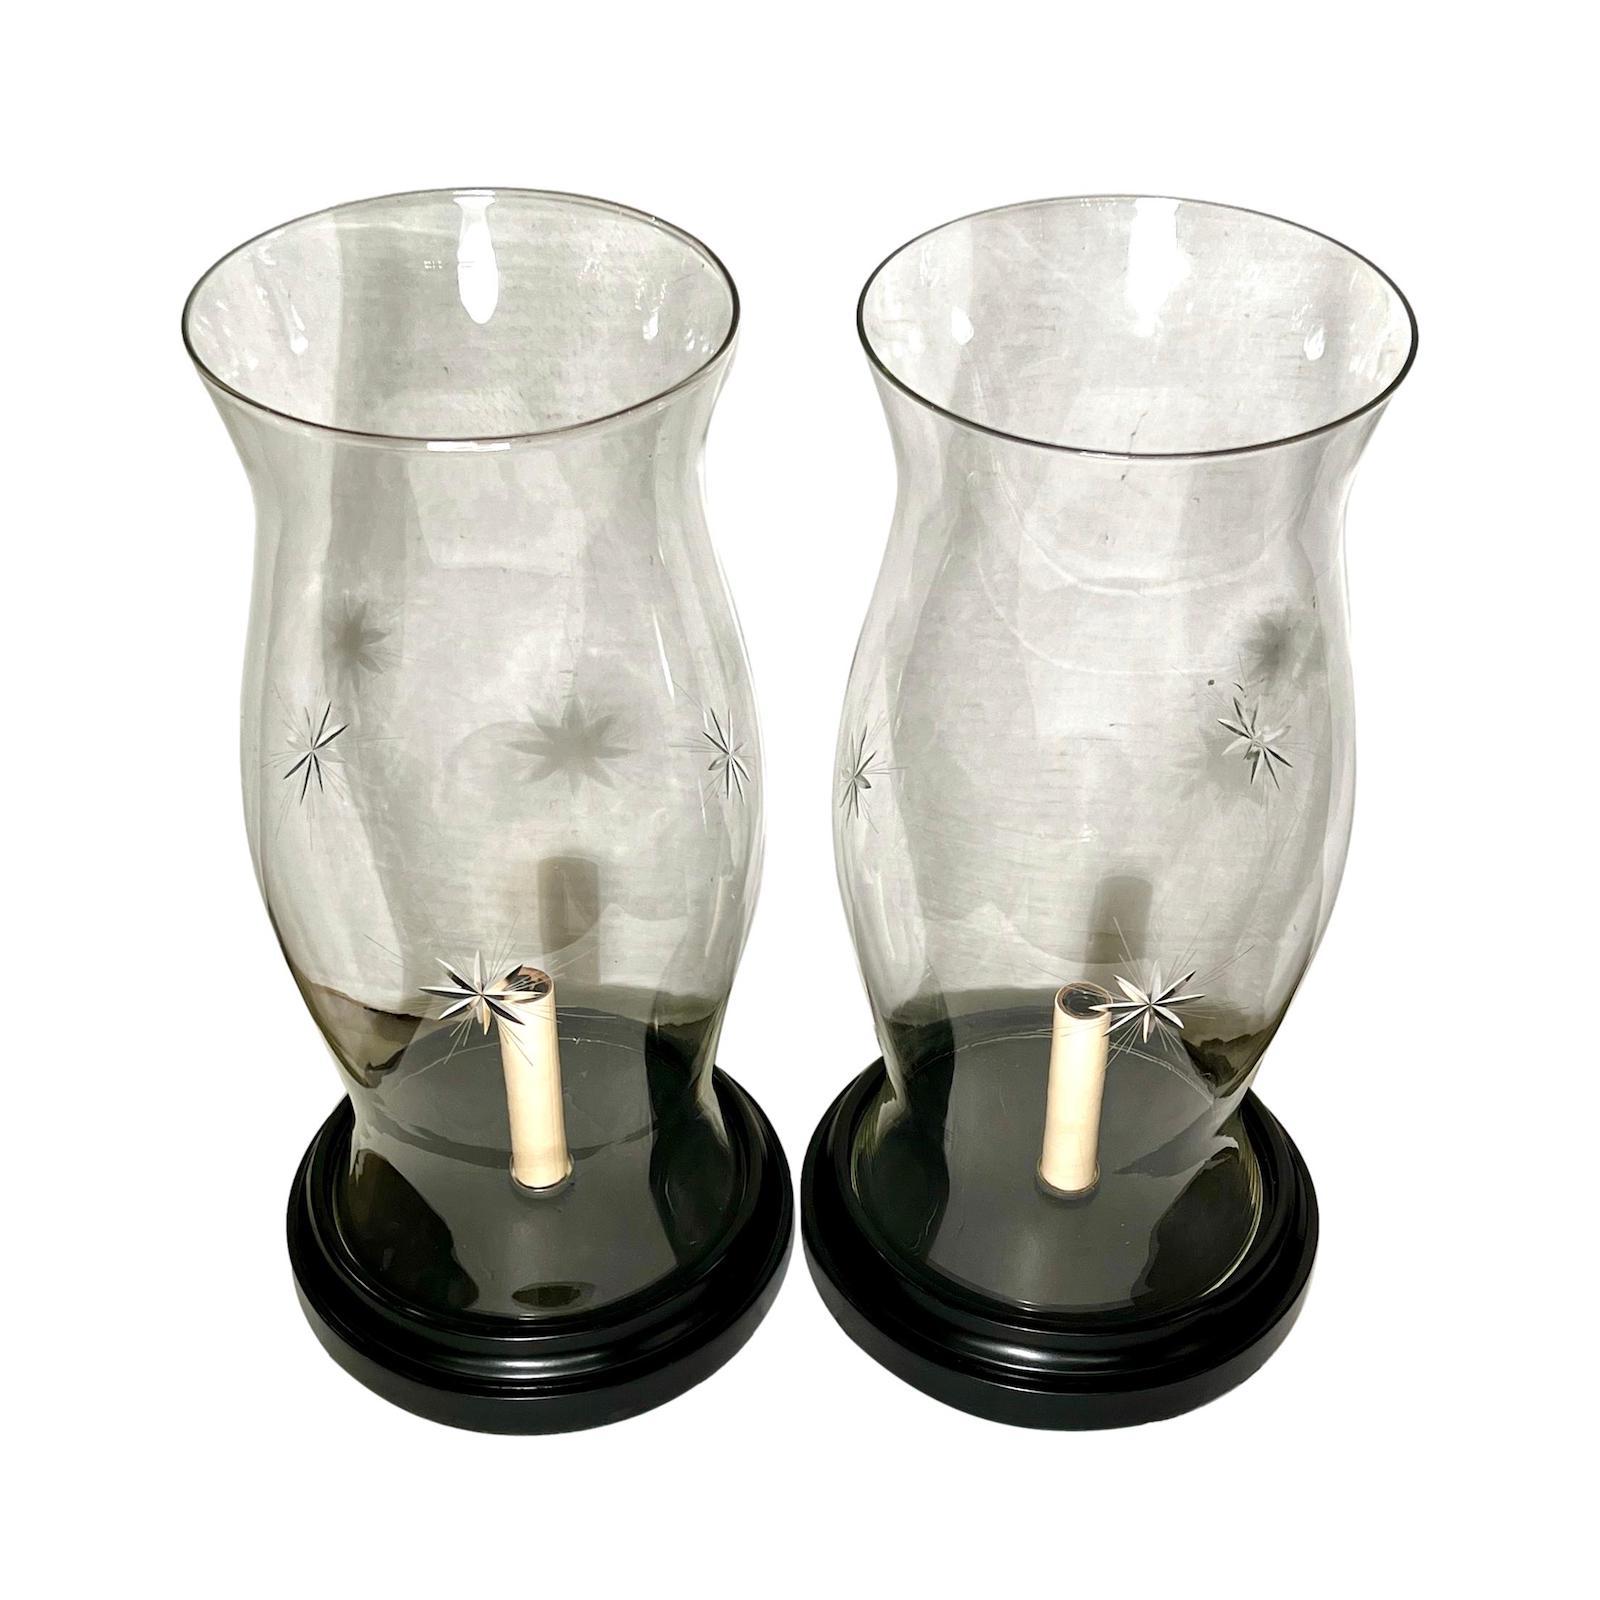 Pair of circa 1950’s English etched hurricanes lamps with single light.

Measurements:
Height: 17?
Diameter at widest: 8.5?.